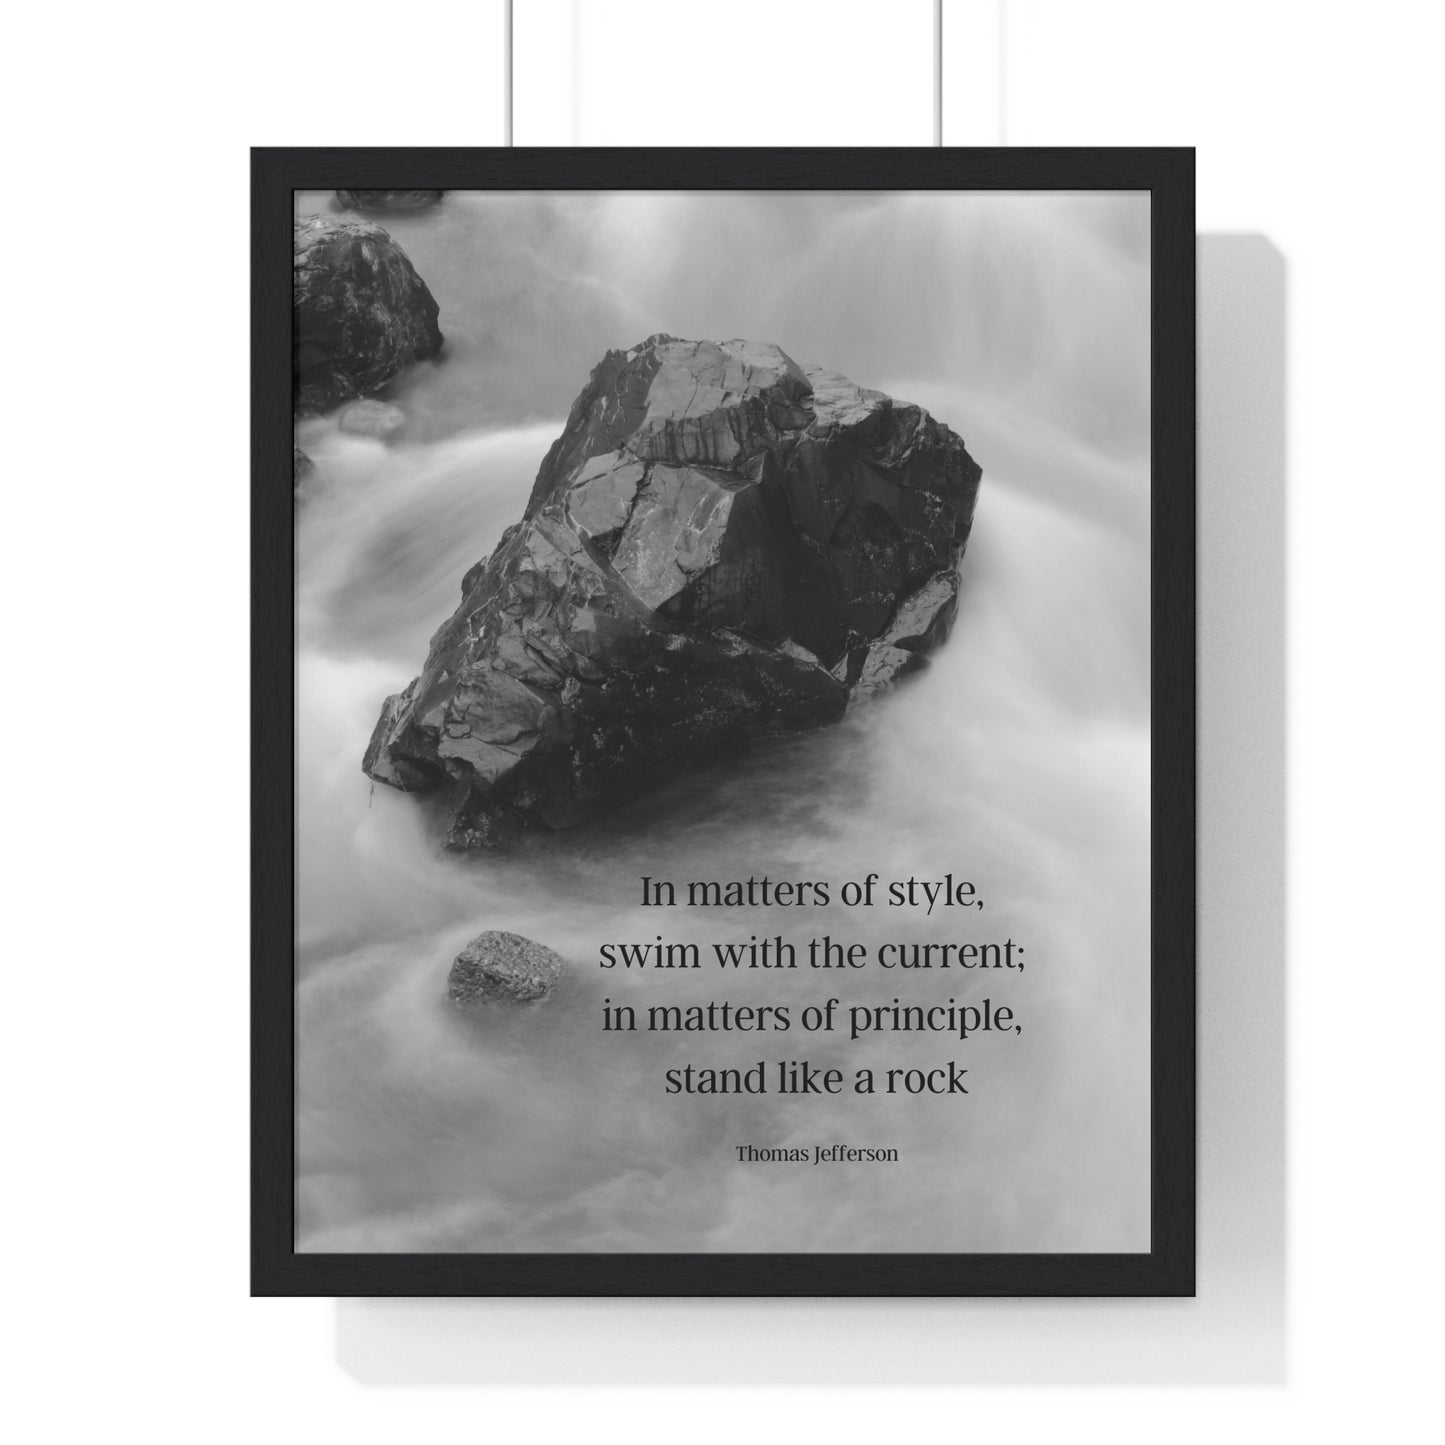 Thomas Jefferson Quote 2, Poster Art, Stand Like a Rock Print, River, Nature, 3rd President of the United States, American Patriots, AI Art, Political Art, Presidential Quotes, Inspirational Quotes